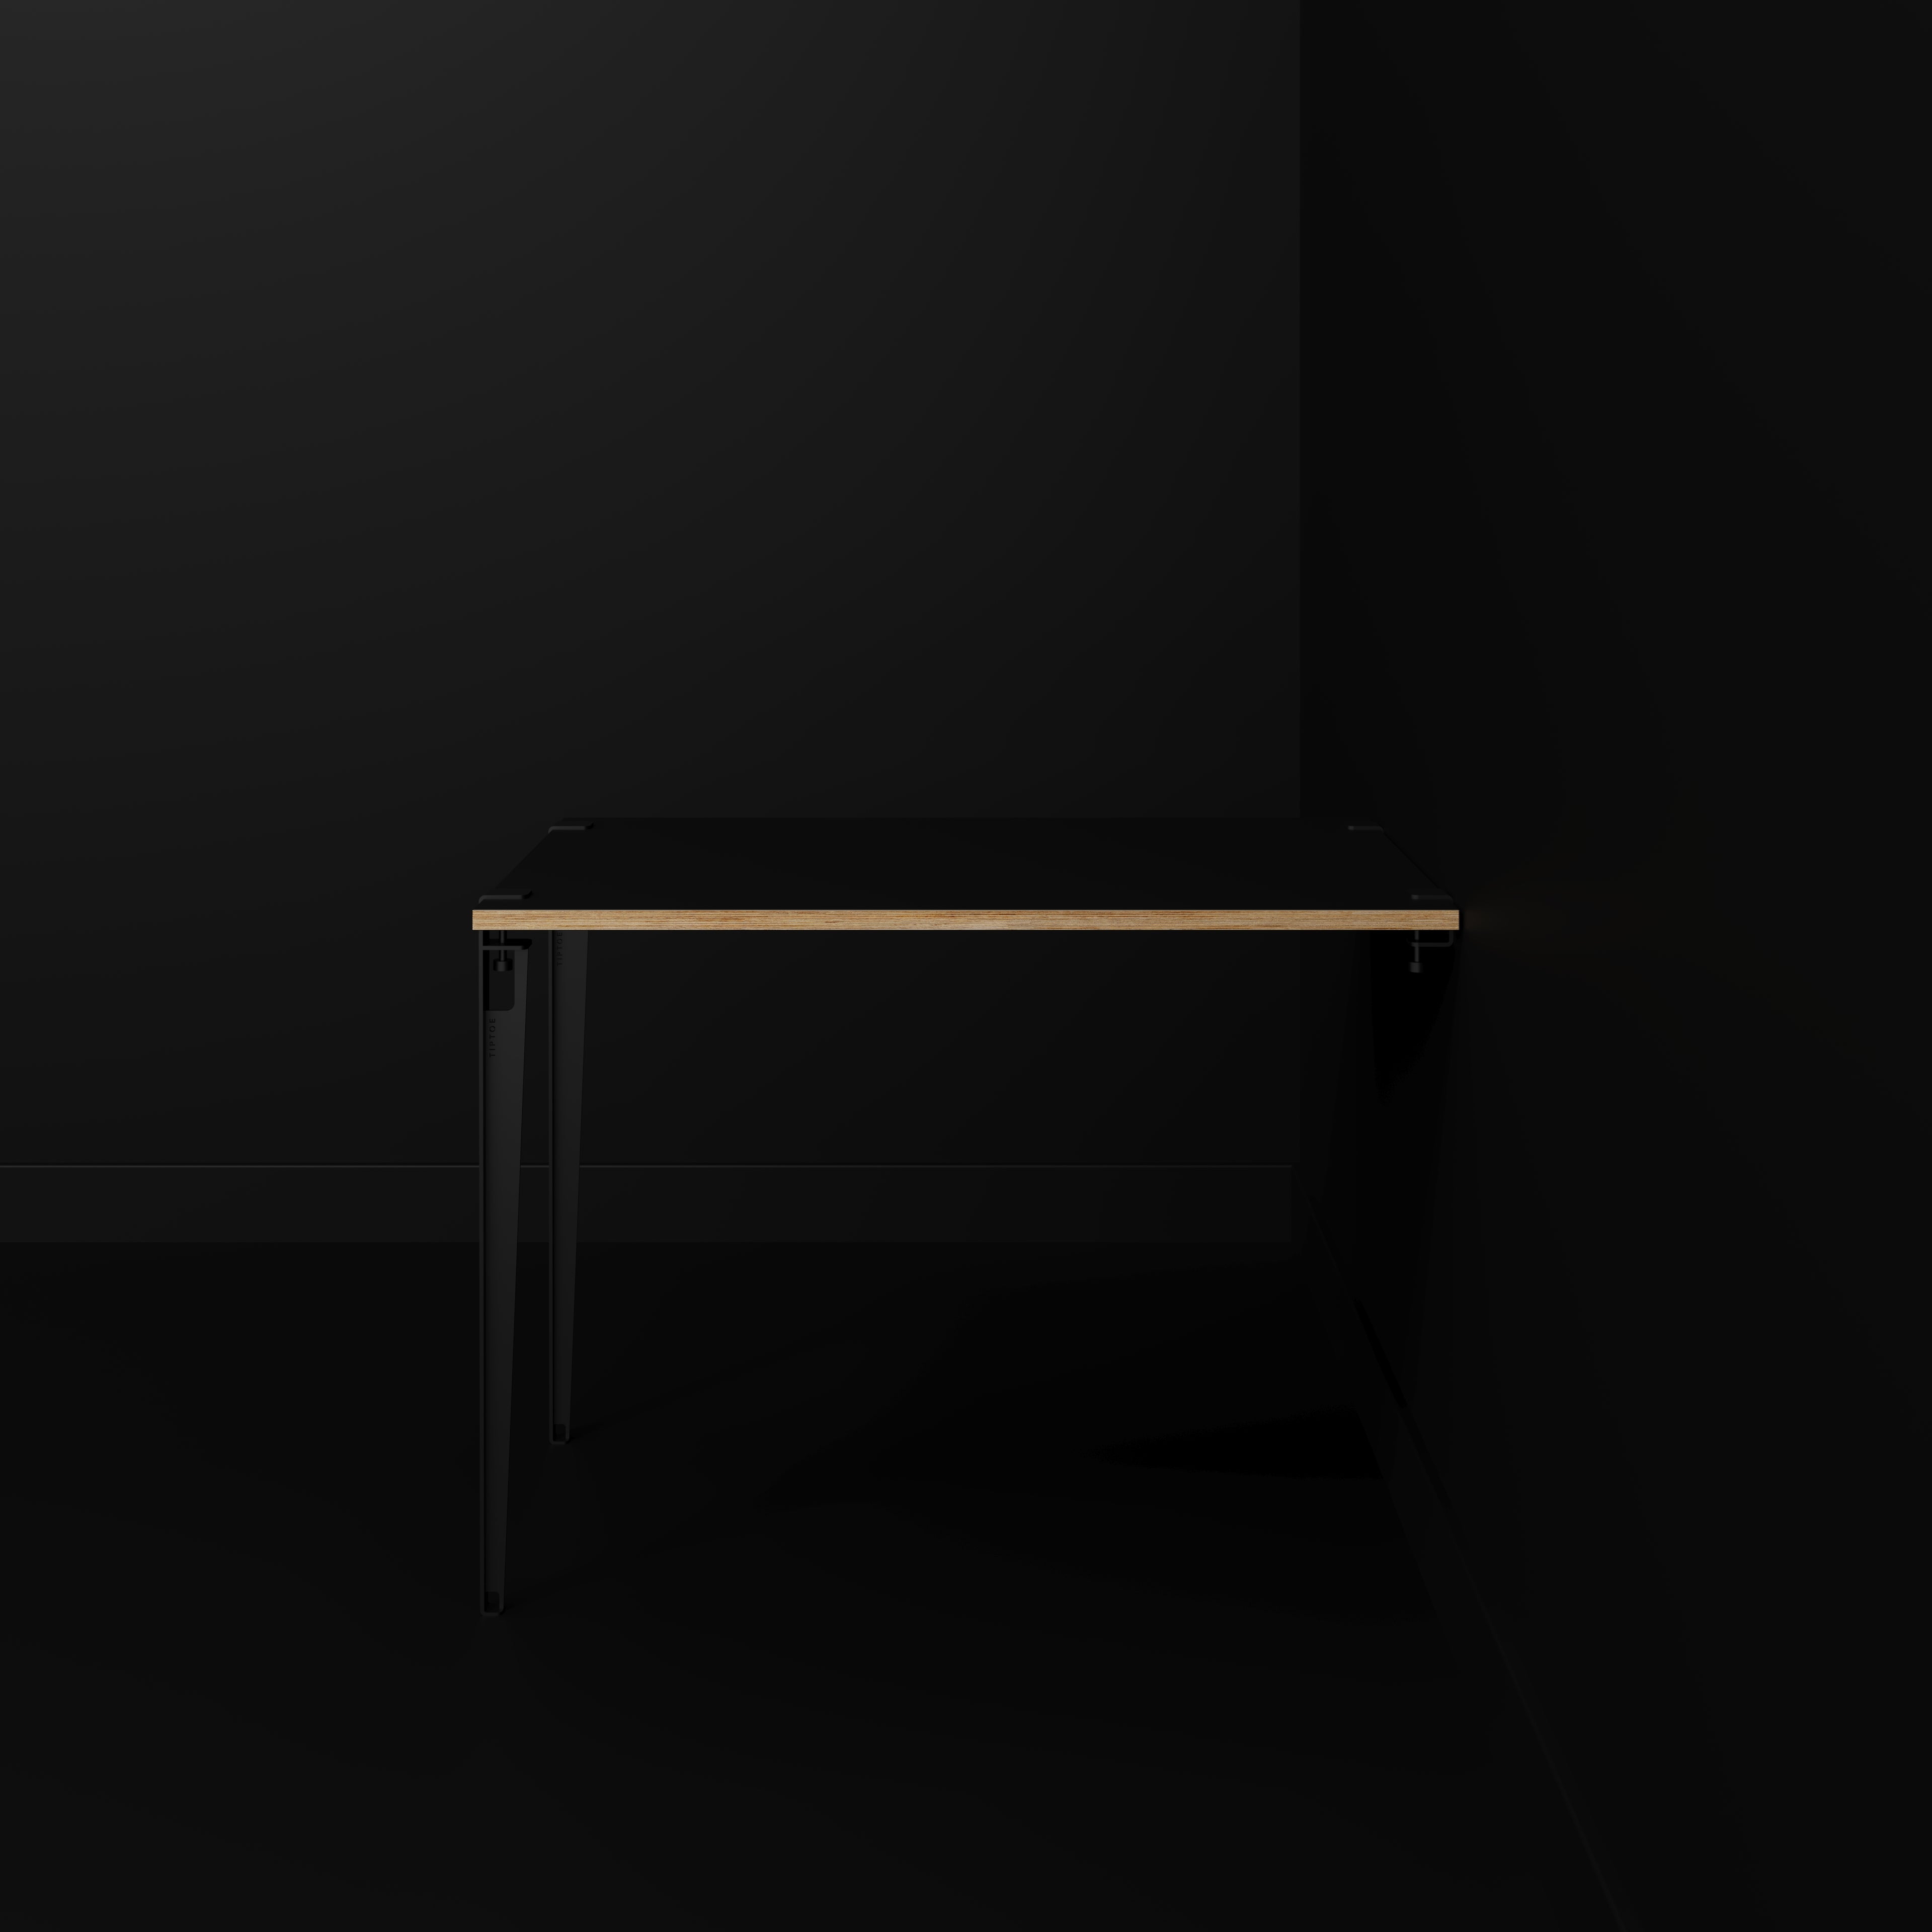 Wall Table with Black Tiptoe Legs and Brackets - Formica Diamond Black - 1200(w) x 800(d) x 900(h)